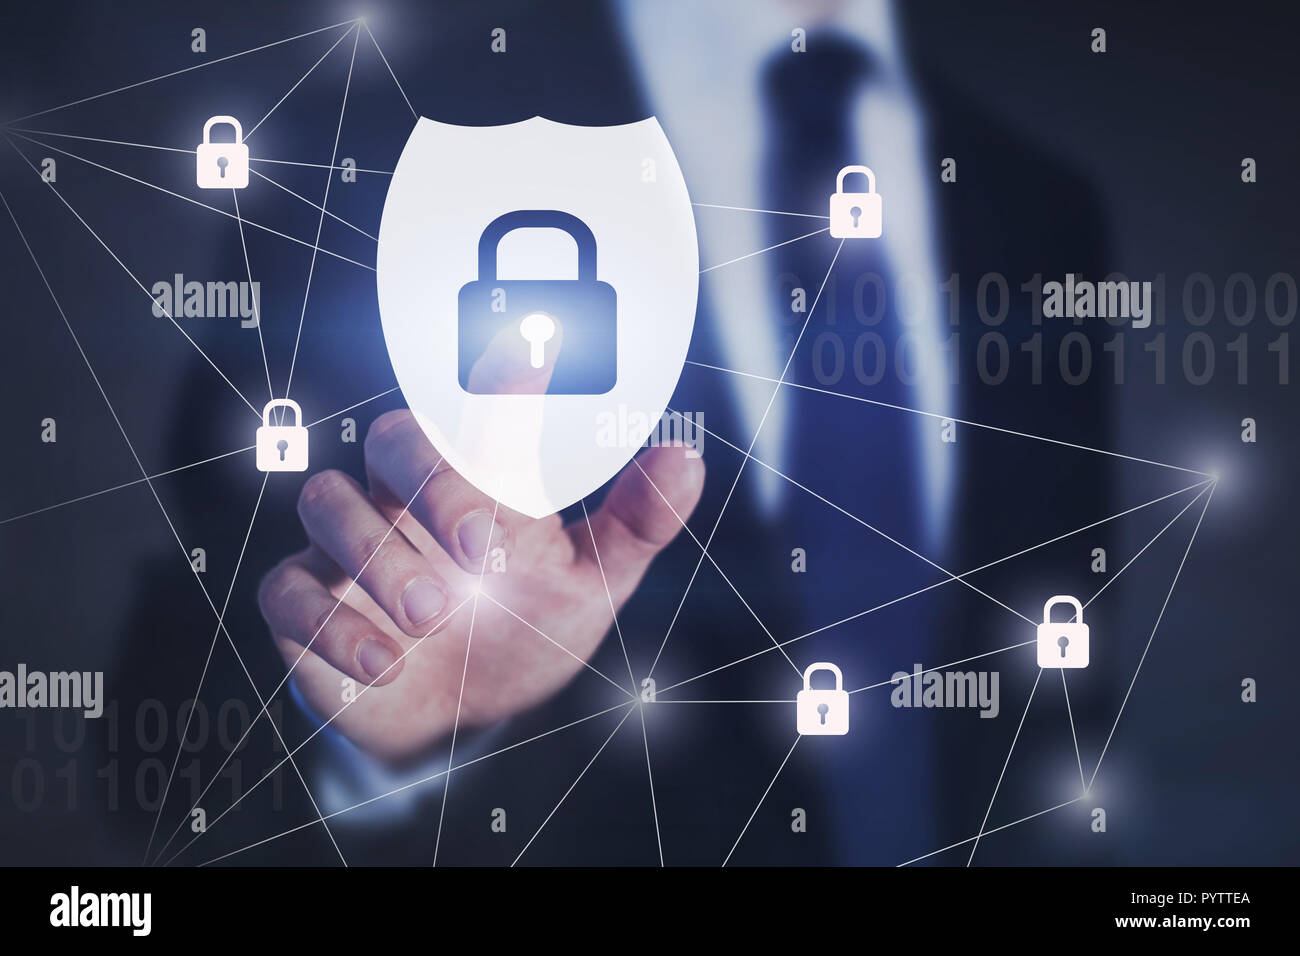 cybersecurity concept, cyber security shield button with padlocks on touch screen Stock Photo